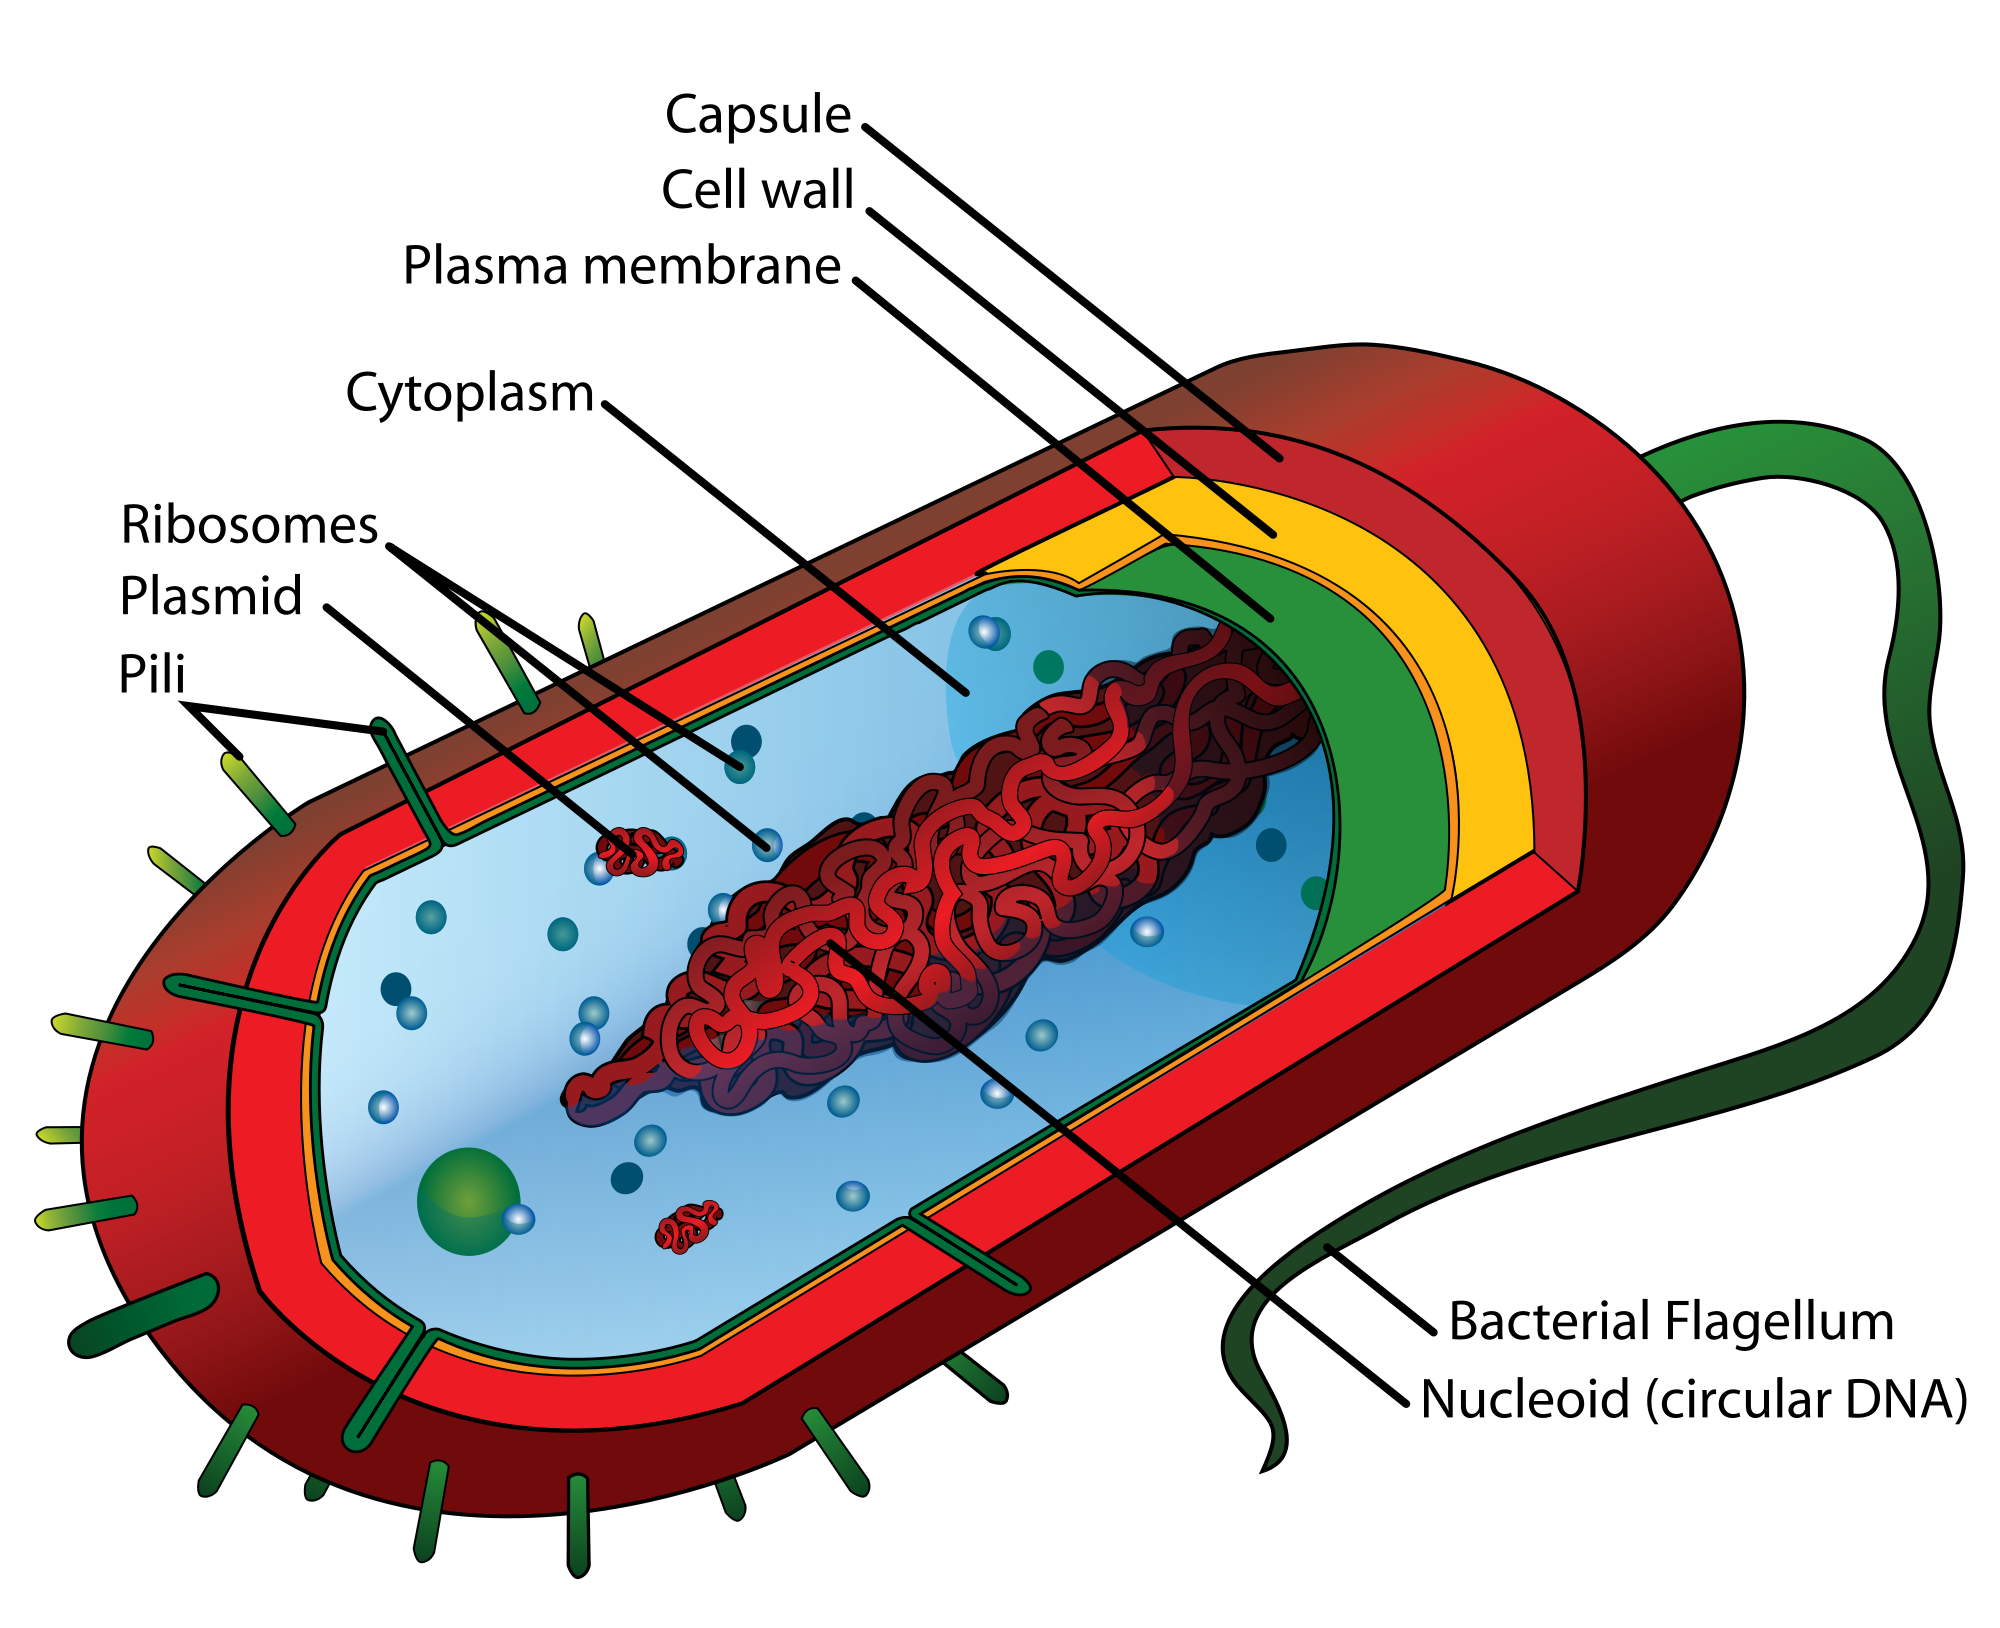 Image shows a diagram of a bacterium. The bacterium is smaller than a typical eukaryotic cell, has fewer organelles and contains no membrane-bound organelles.